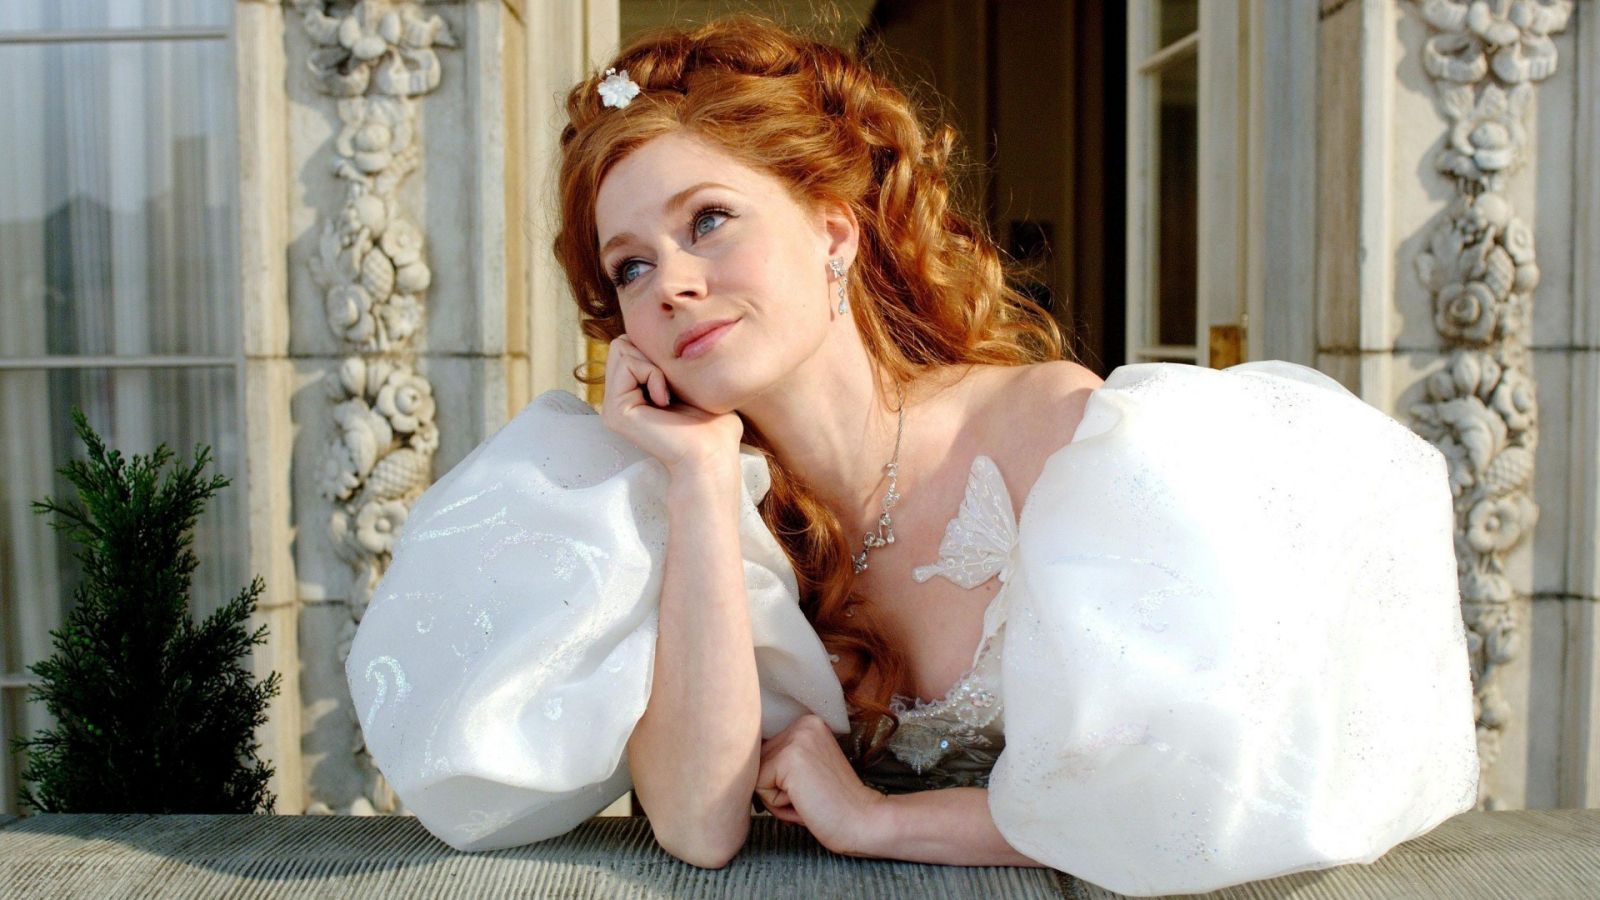 A charming picture of Giselle from Enchanted.